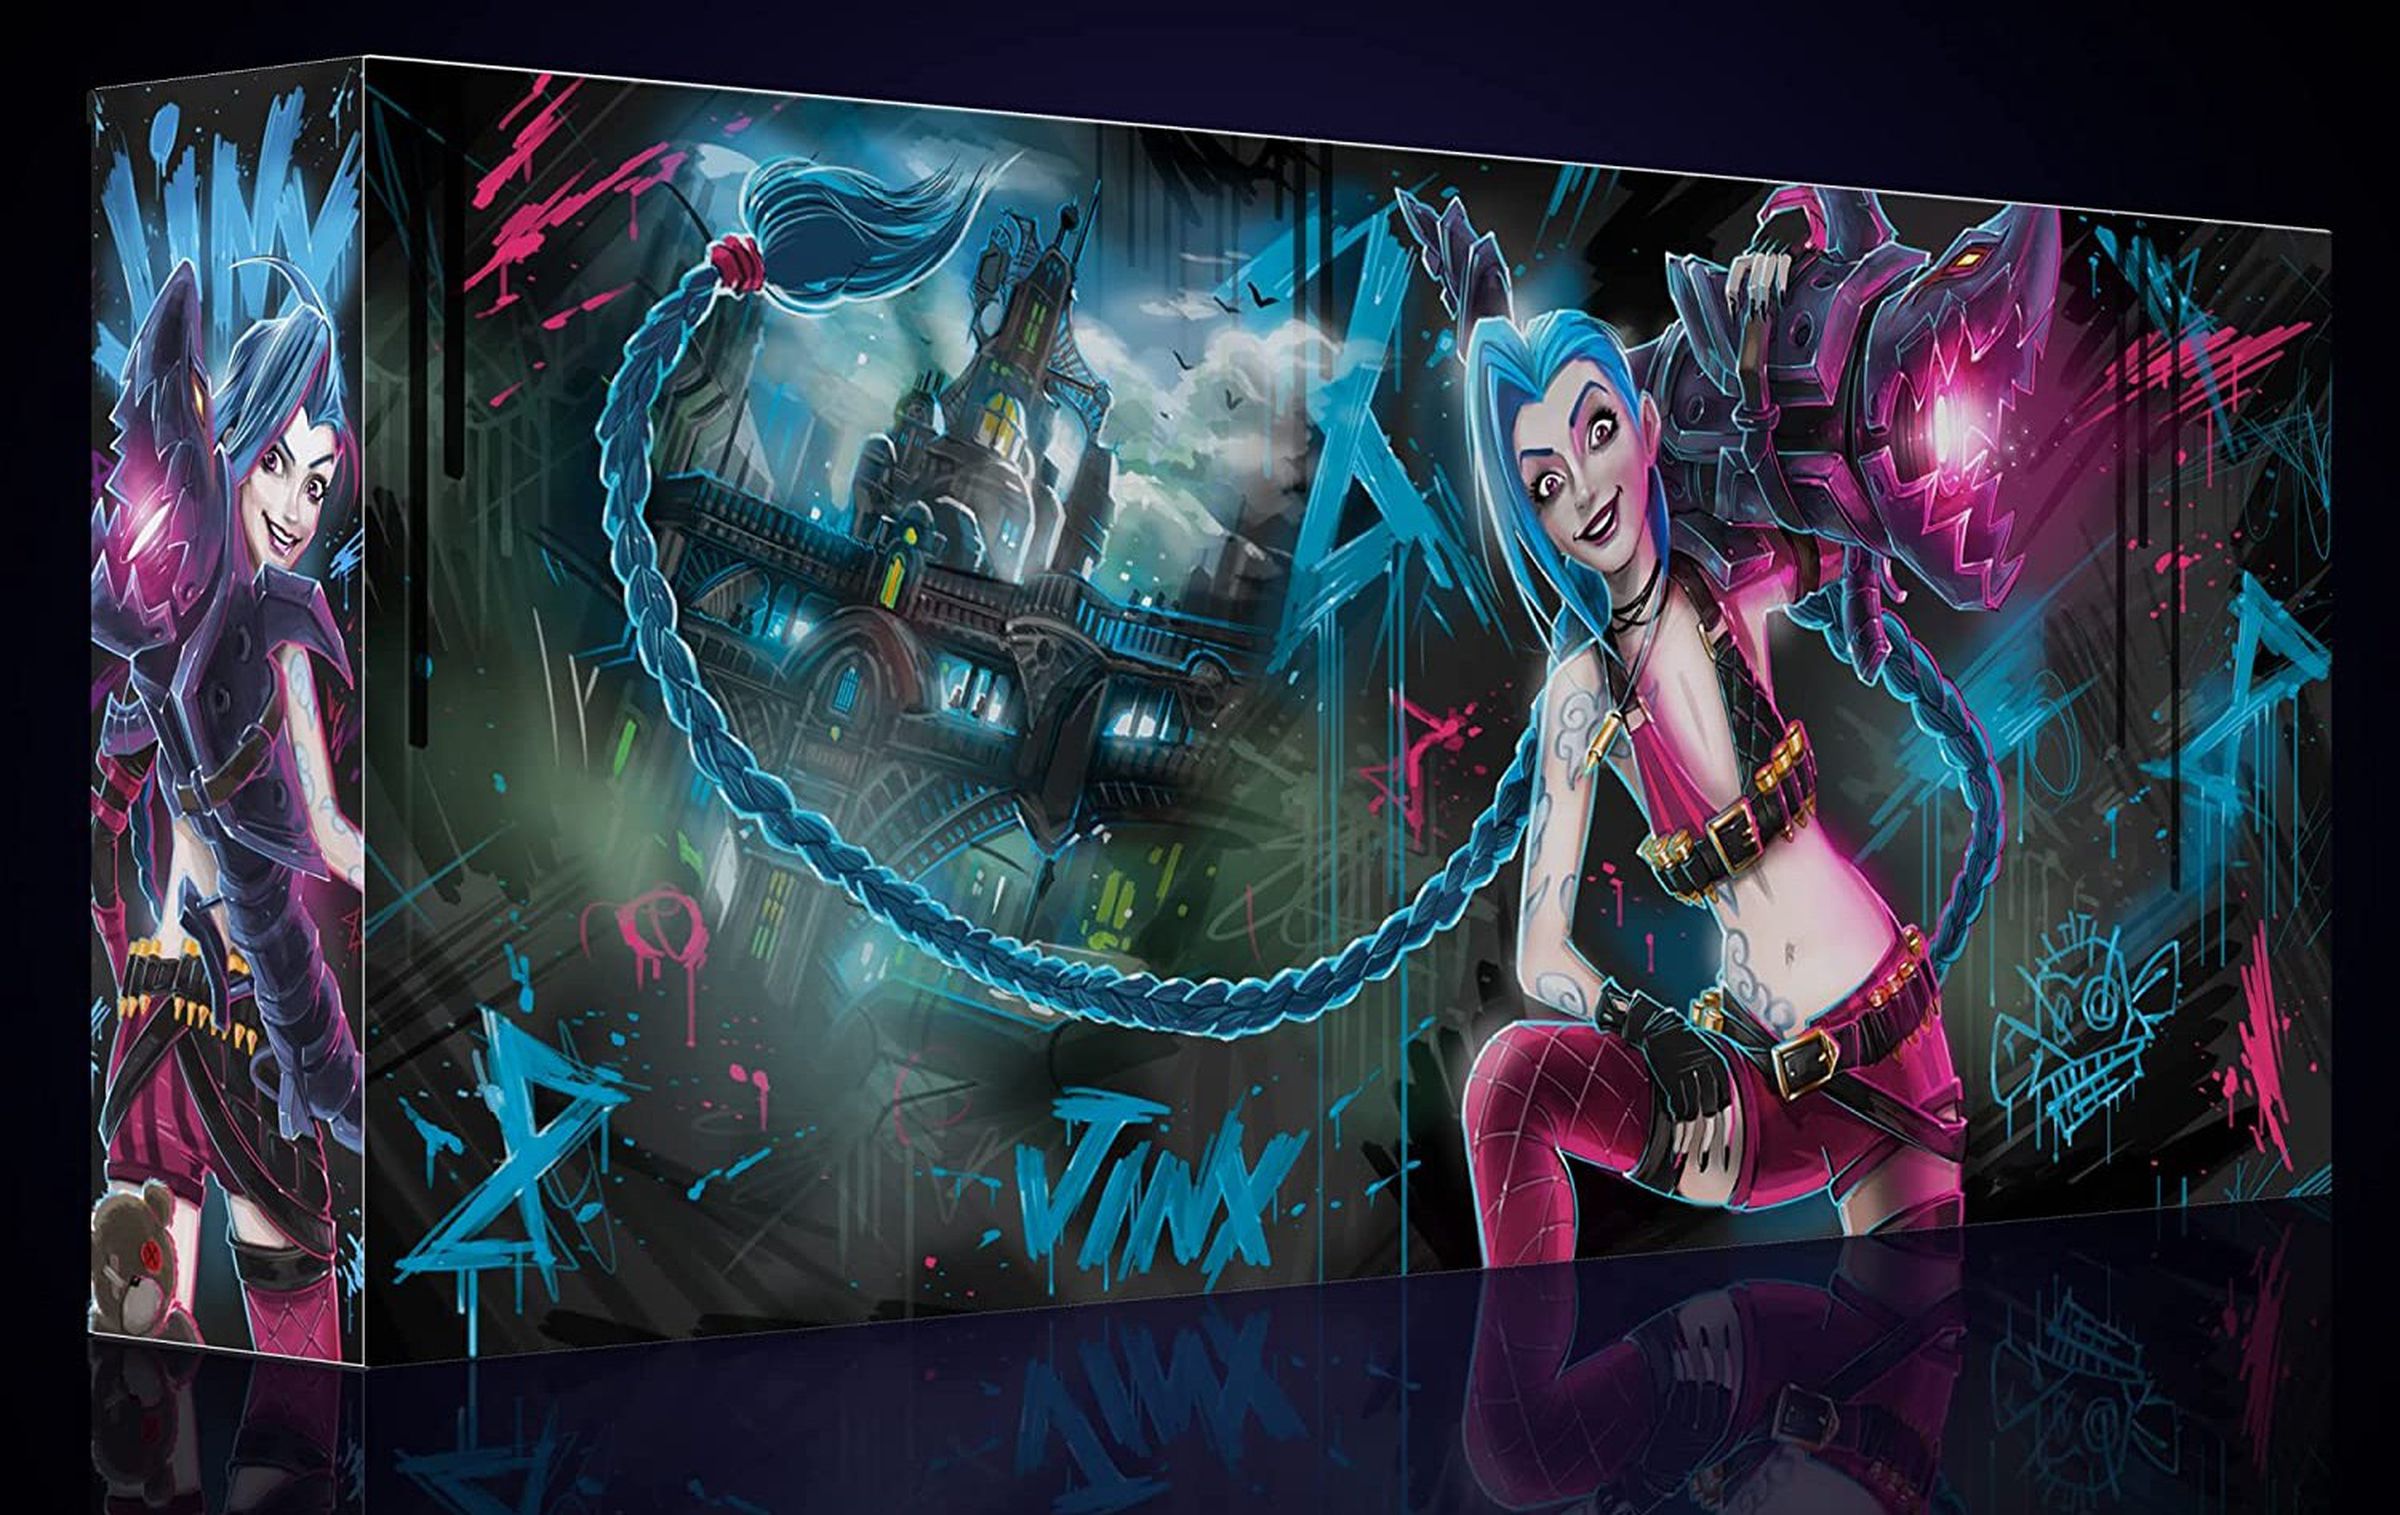 Blue-haired Jinx poses like a rockstar with a fish cannon on one arm and a dark city in the background.